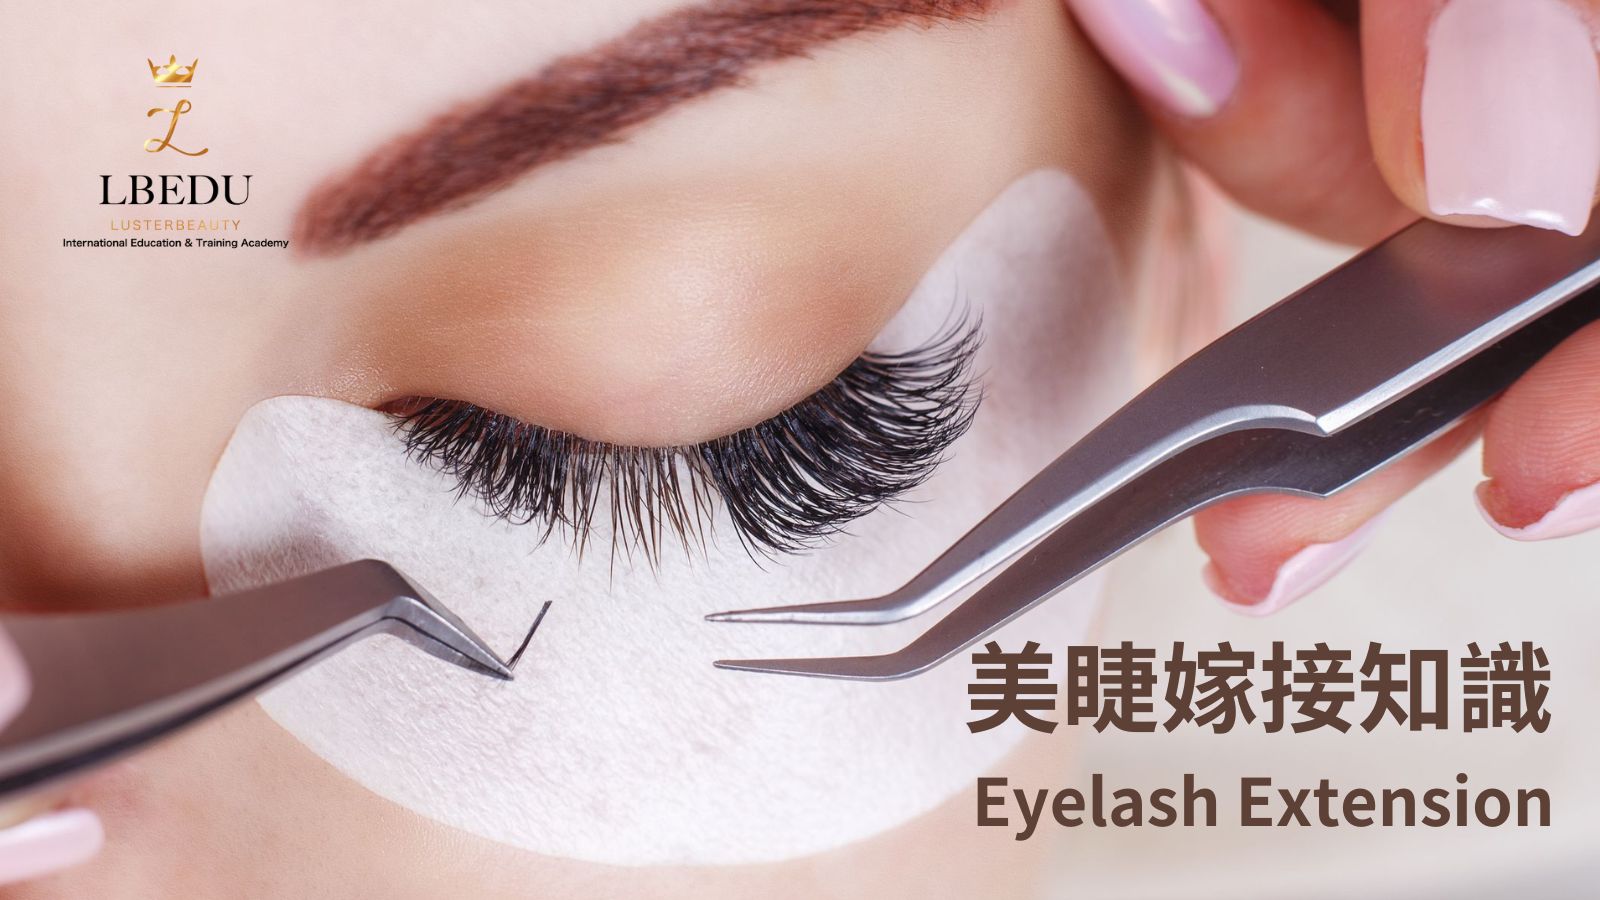 What's Eyelash Extensions?